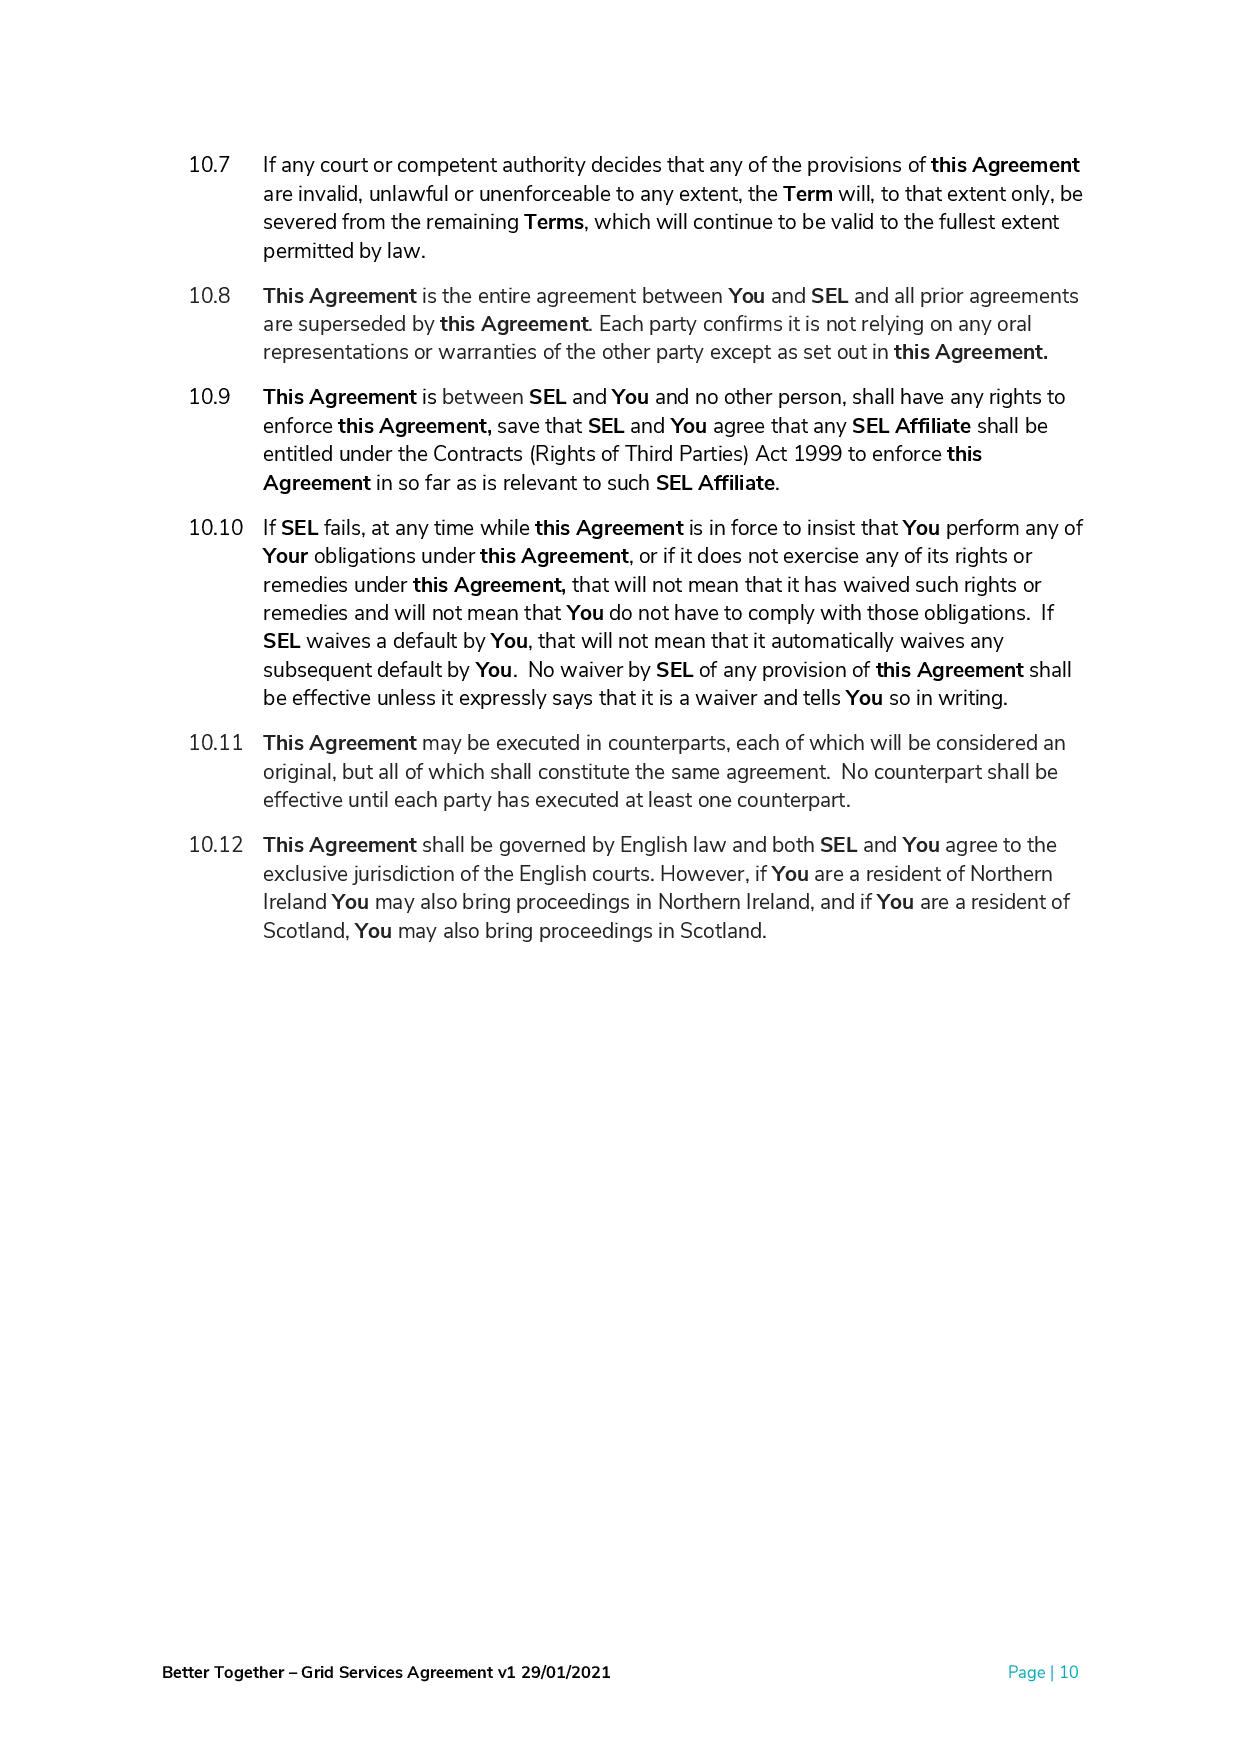 Better_Together_-_Grid_Services_Agreement-page-011.jpg